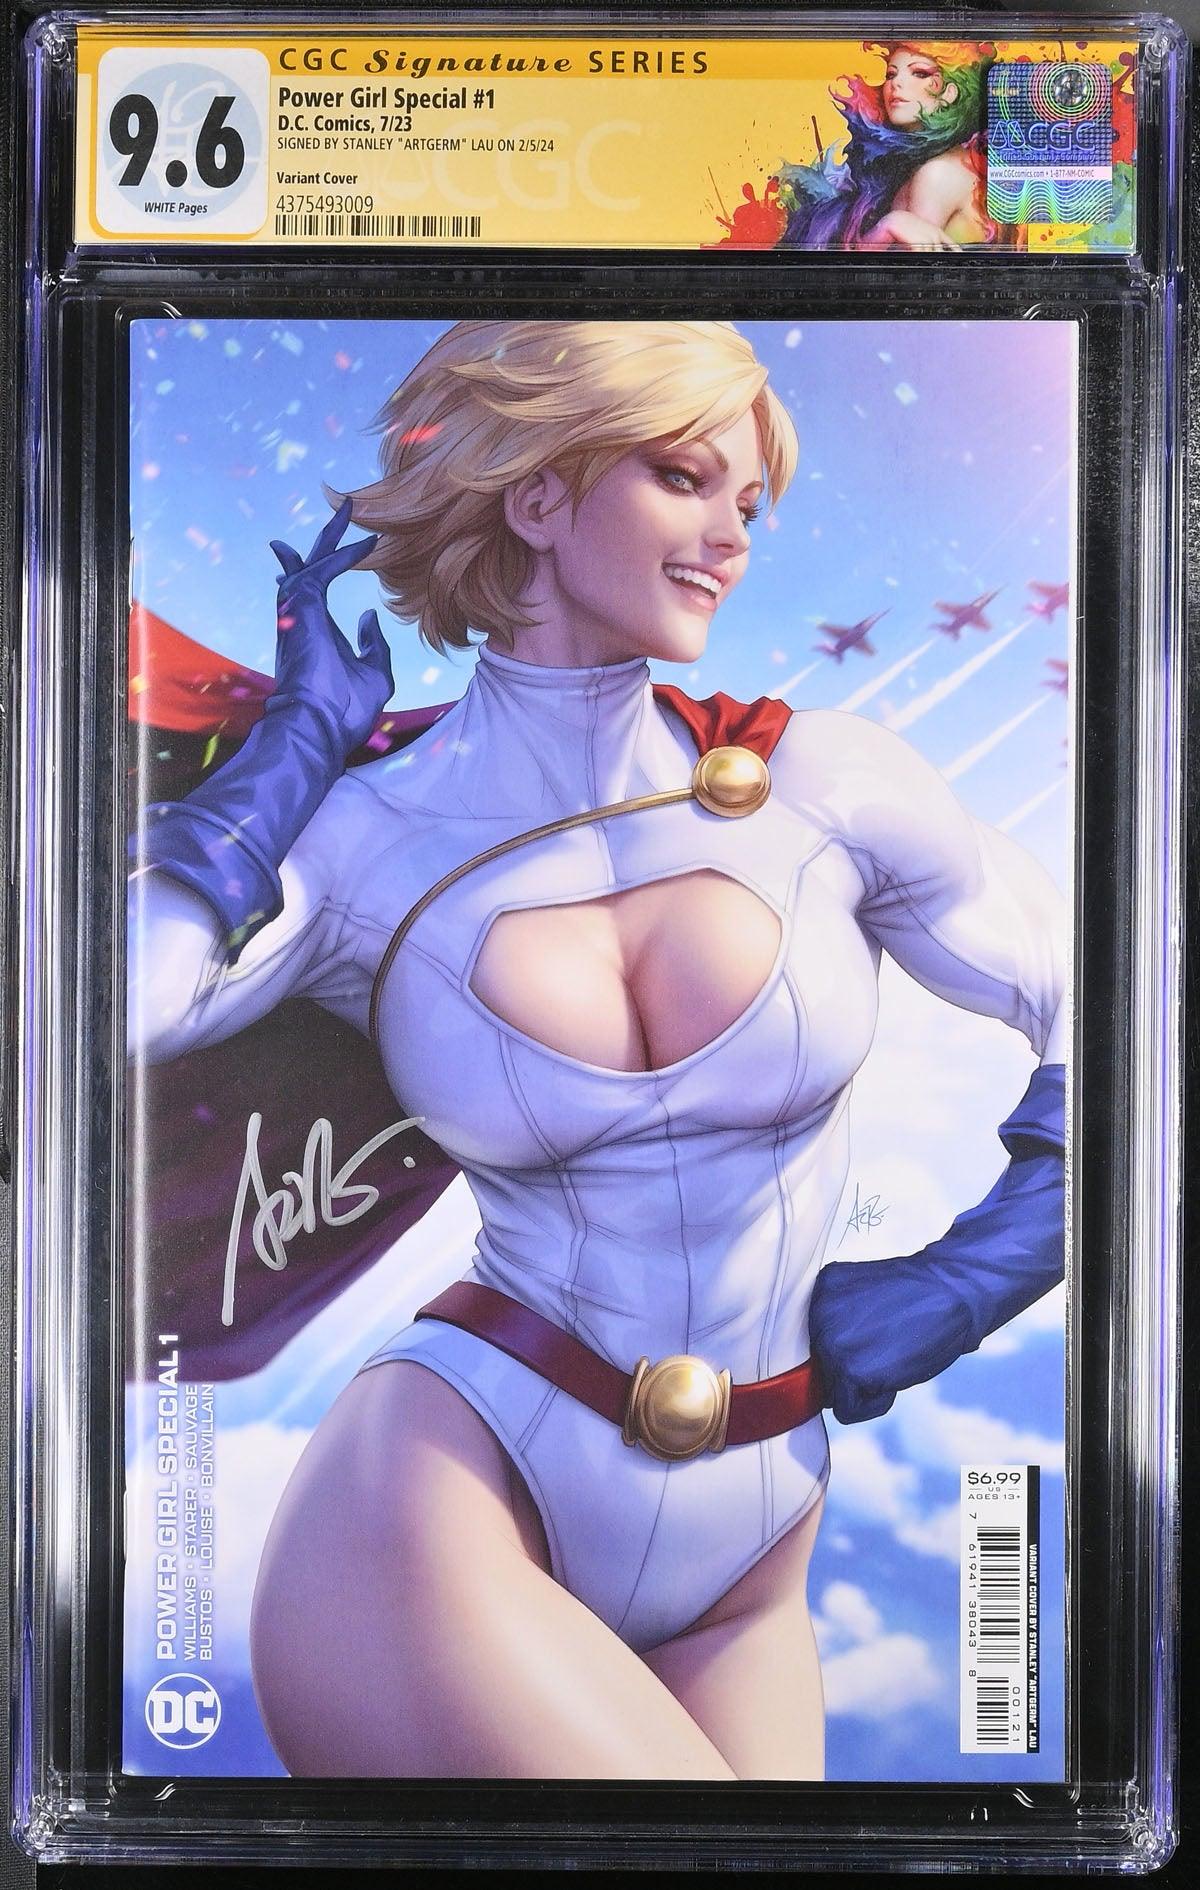 CGC POWER GIRL SPECIAL #1 LAU VARIANT (9.6) SIGNATURE SERIES - SIGNED BY STANLEY "ARTGERM"